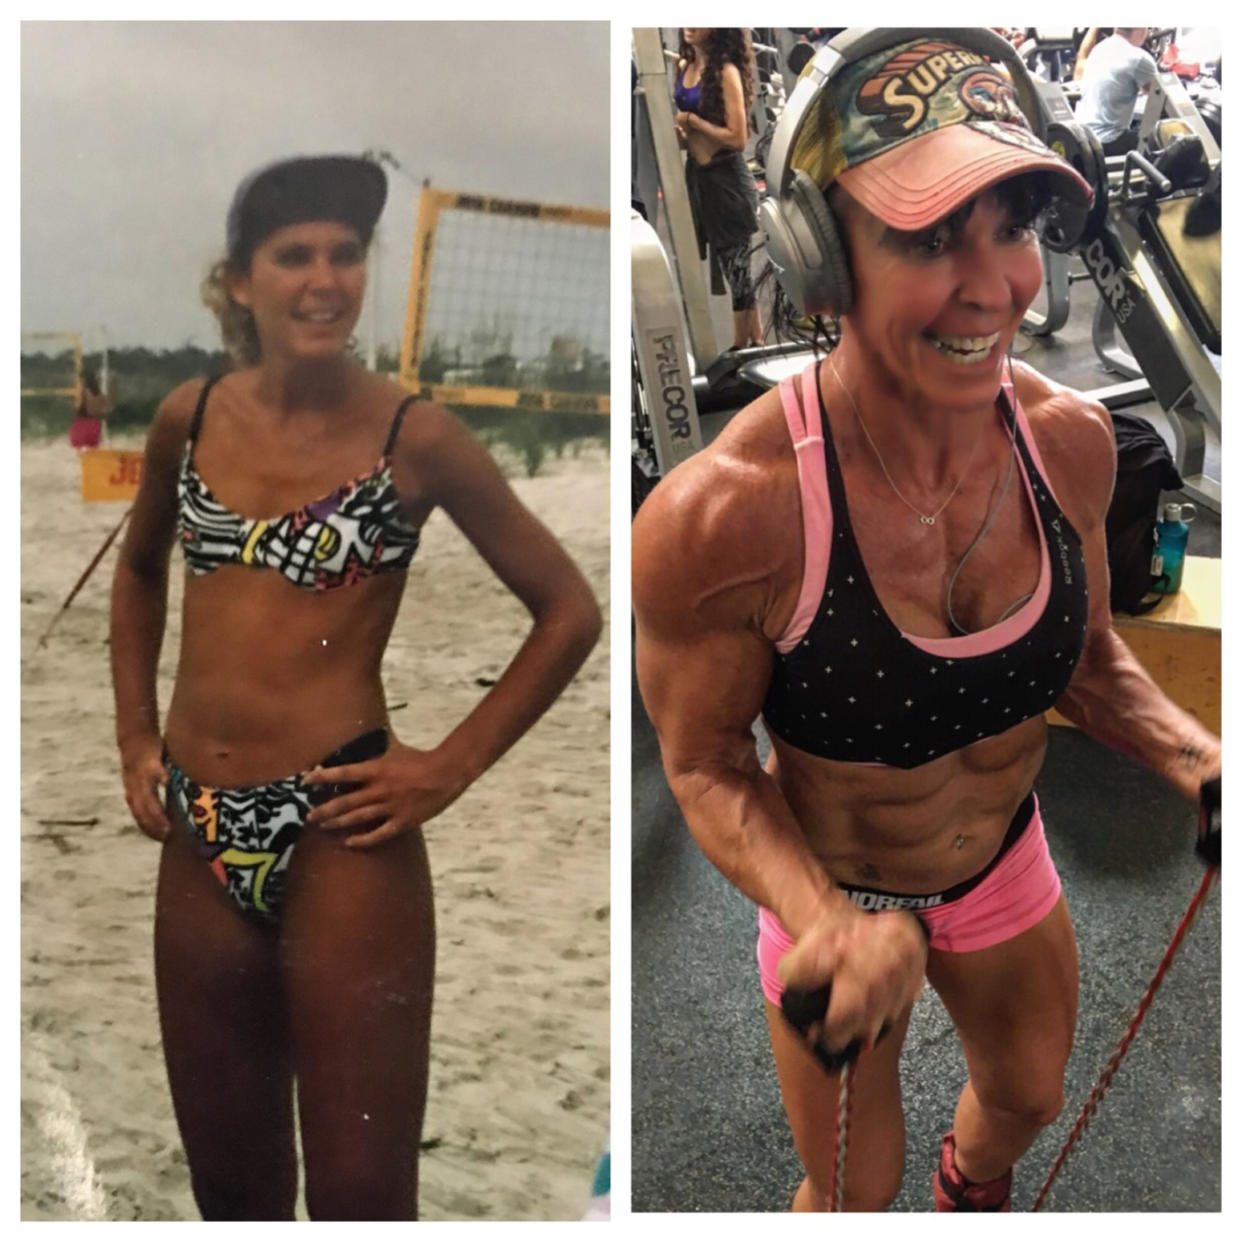 Logan dropped to an unhealthy weight when she was struggling with an eating disorder, left. Today, she is in top shape.  (Courtesy Andrea Logan)